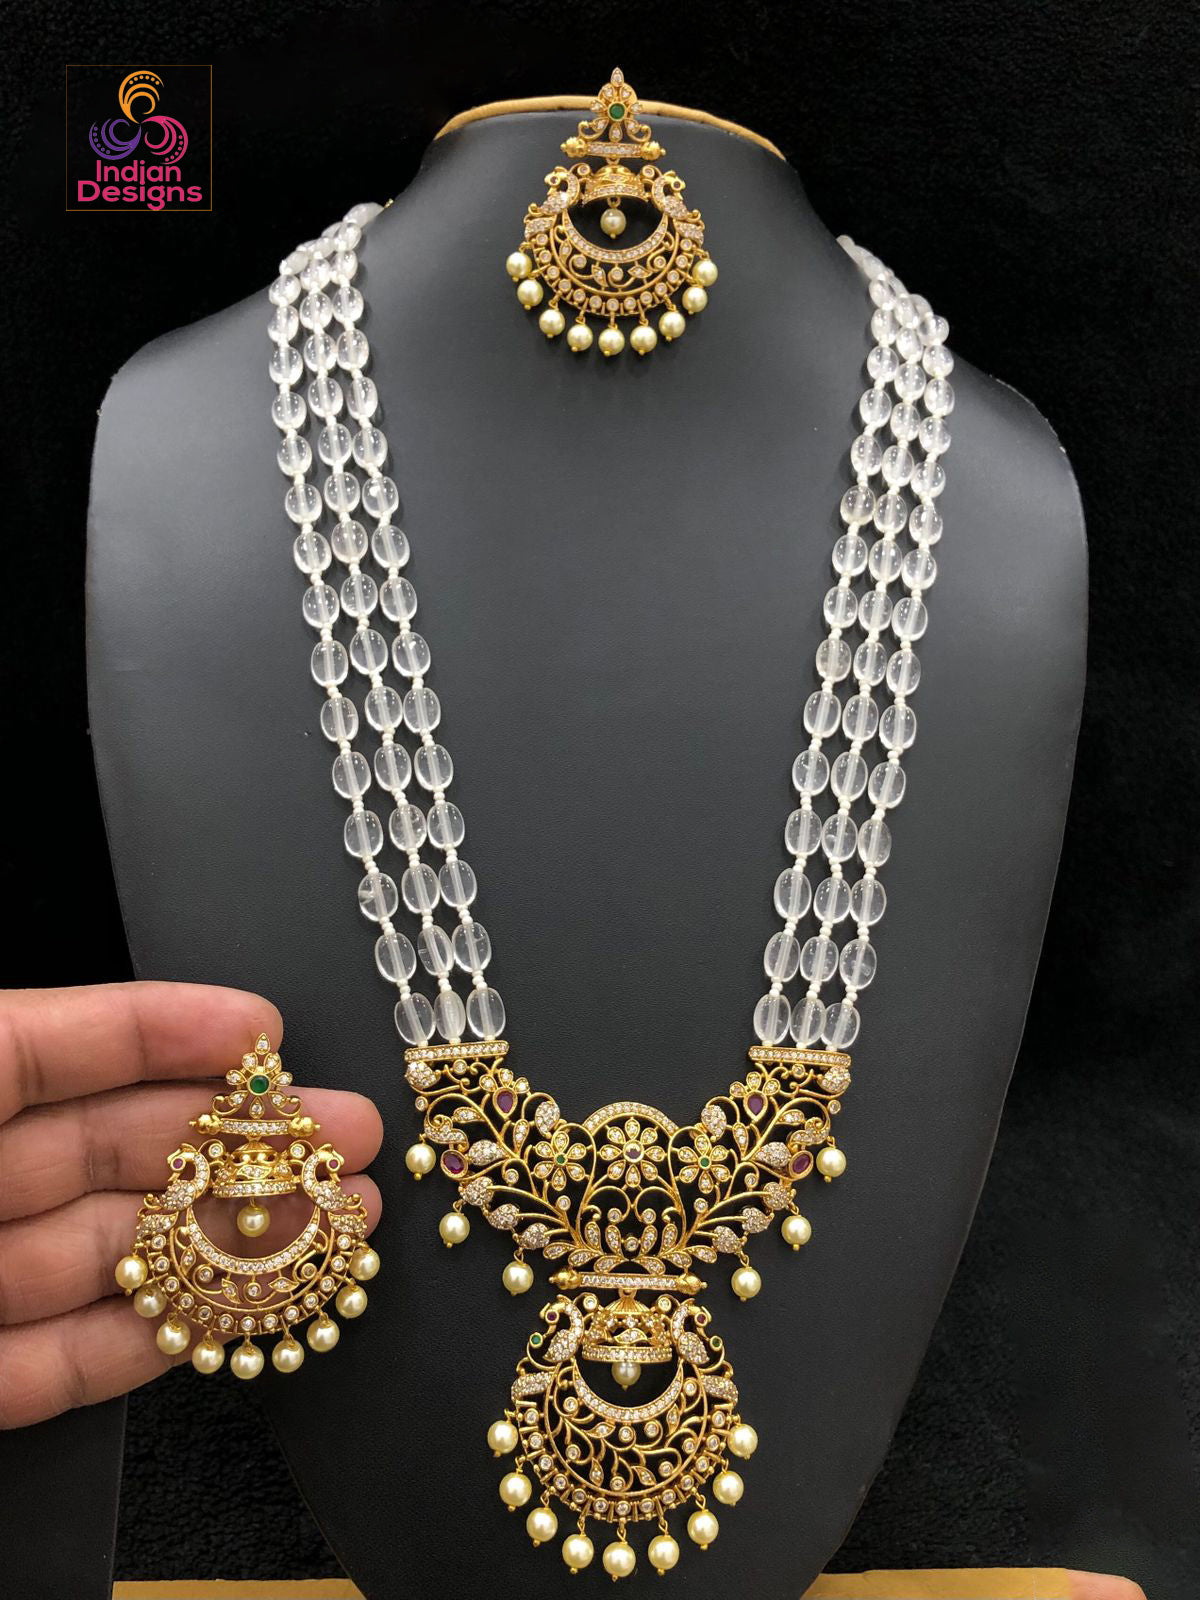 Pin by shamili on beads jewellery | Beaded jewelry designs, Beaded jewelry  necklaces, Antique bridal jewelry